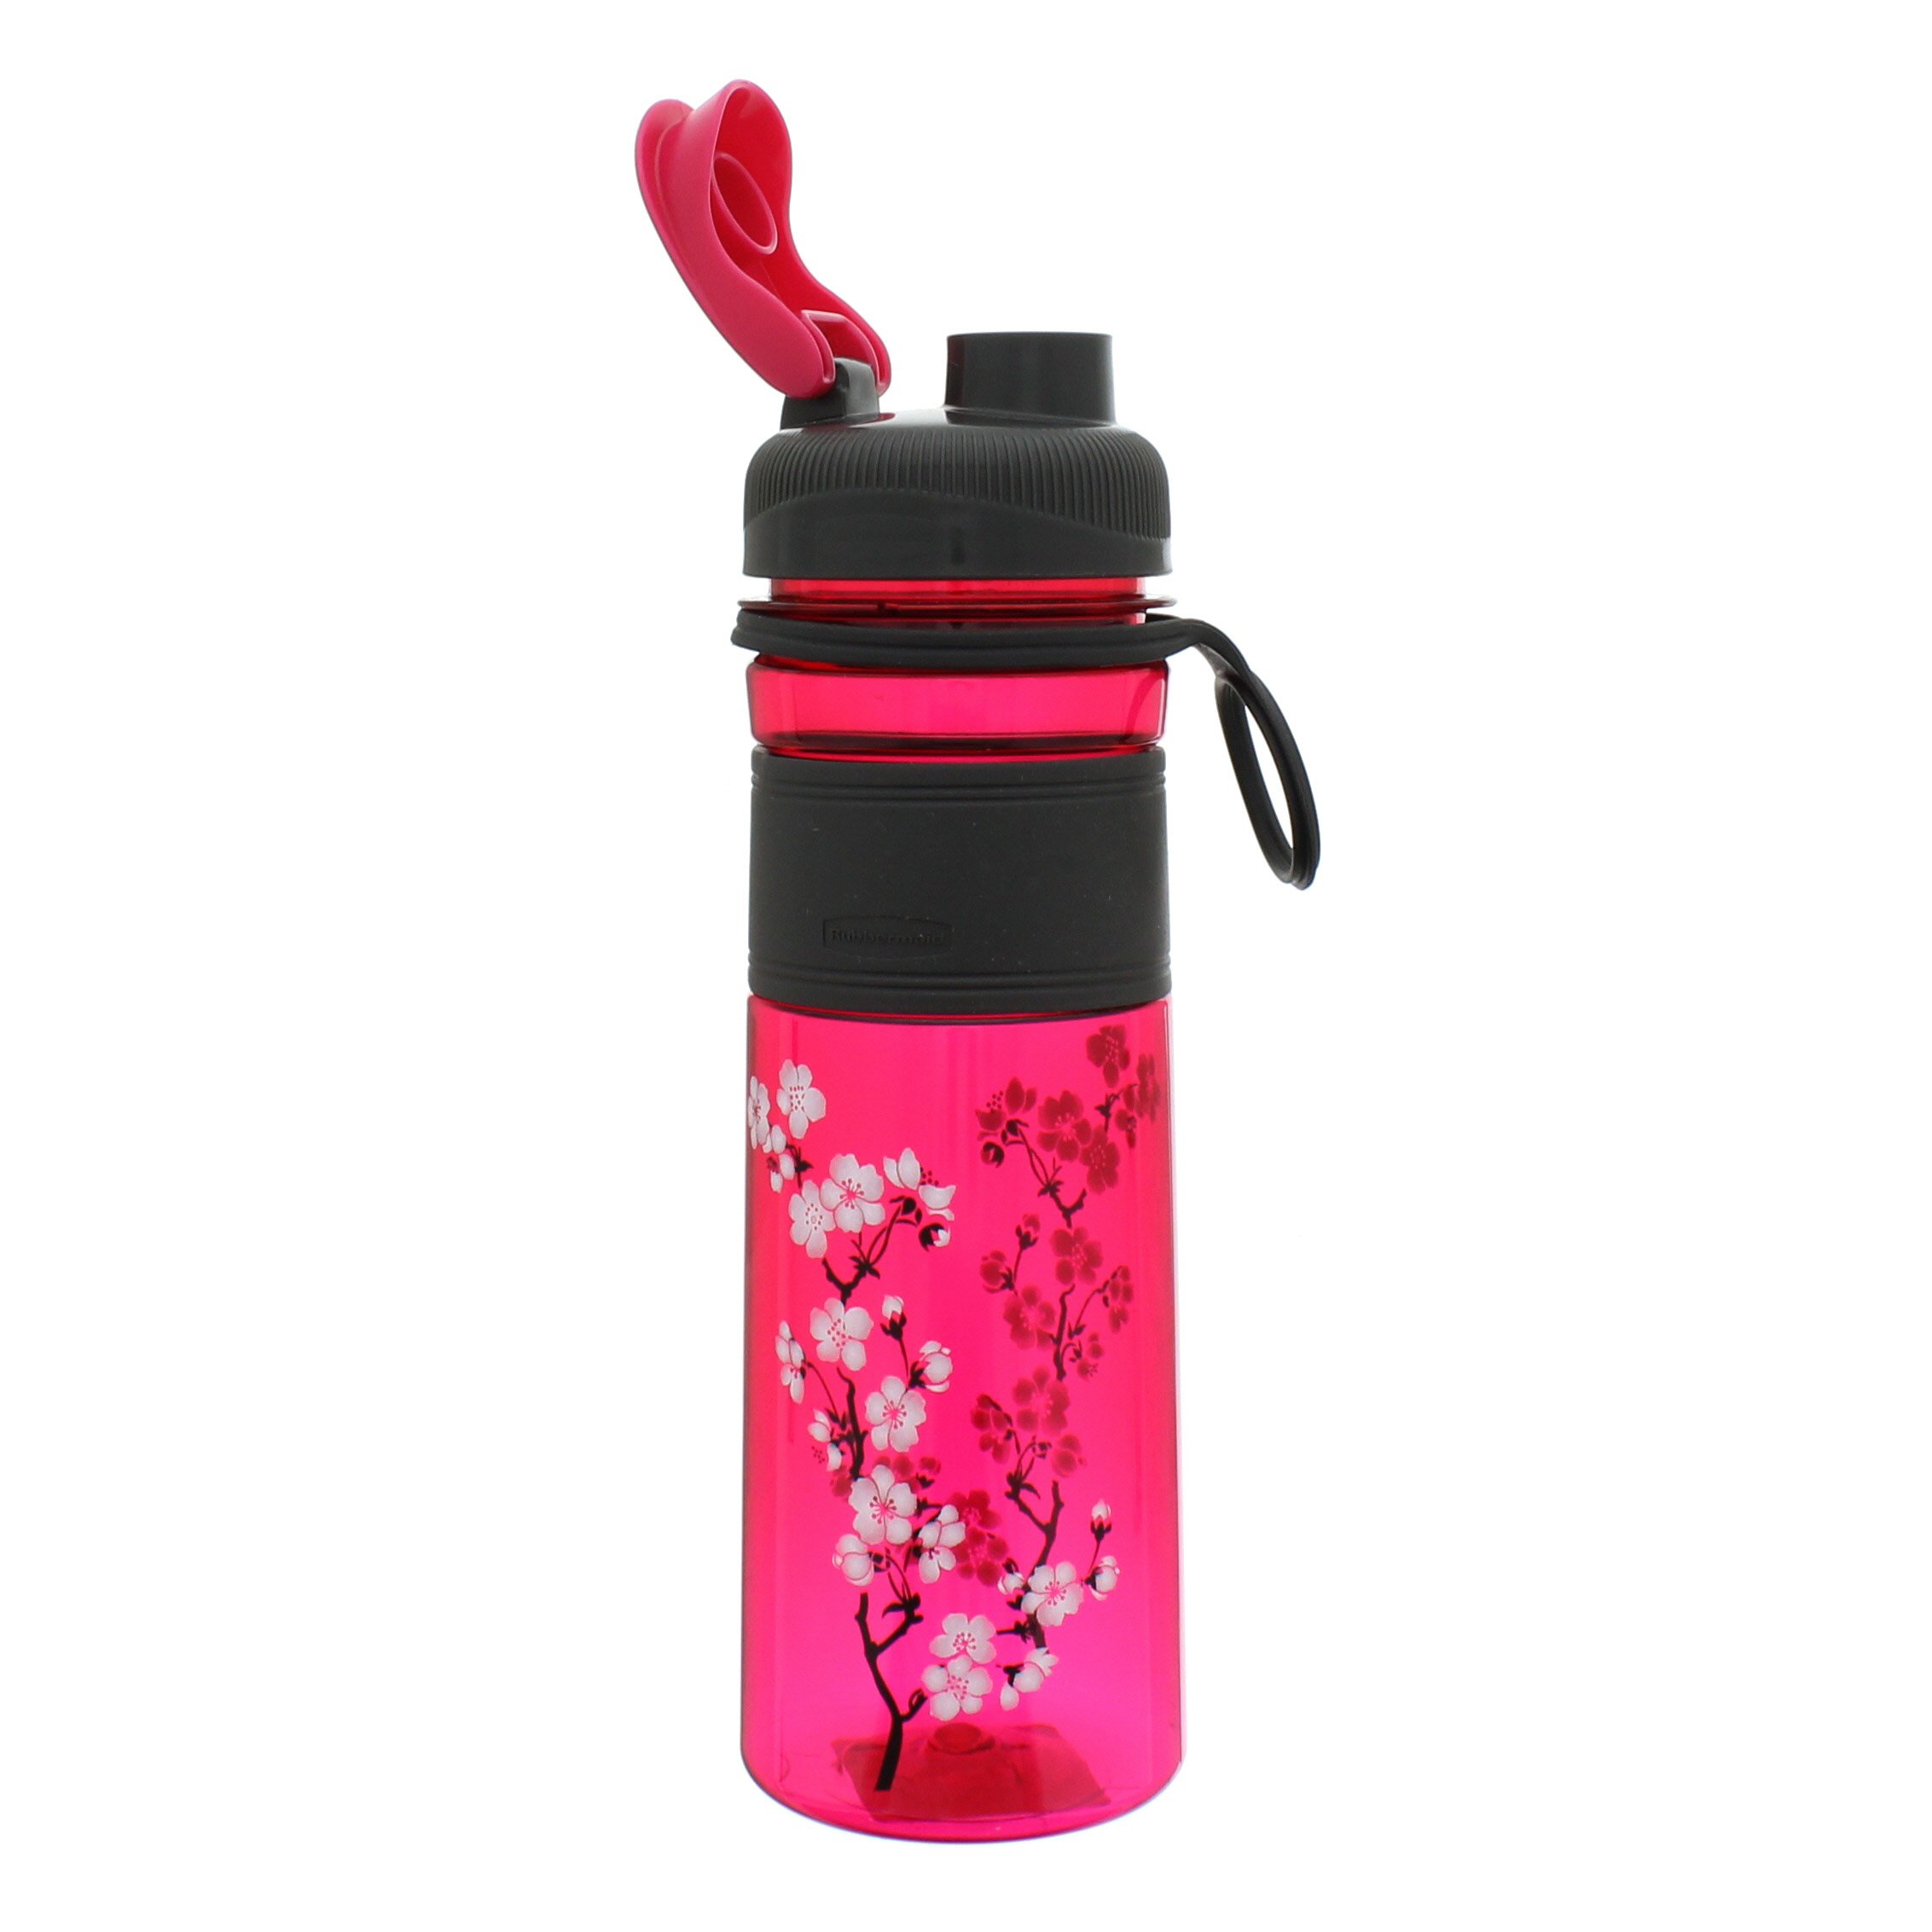 Rubbermaid Chug Water Bottle Assorted Colors - Shop Travel & To-Go